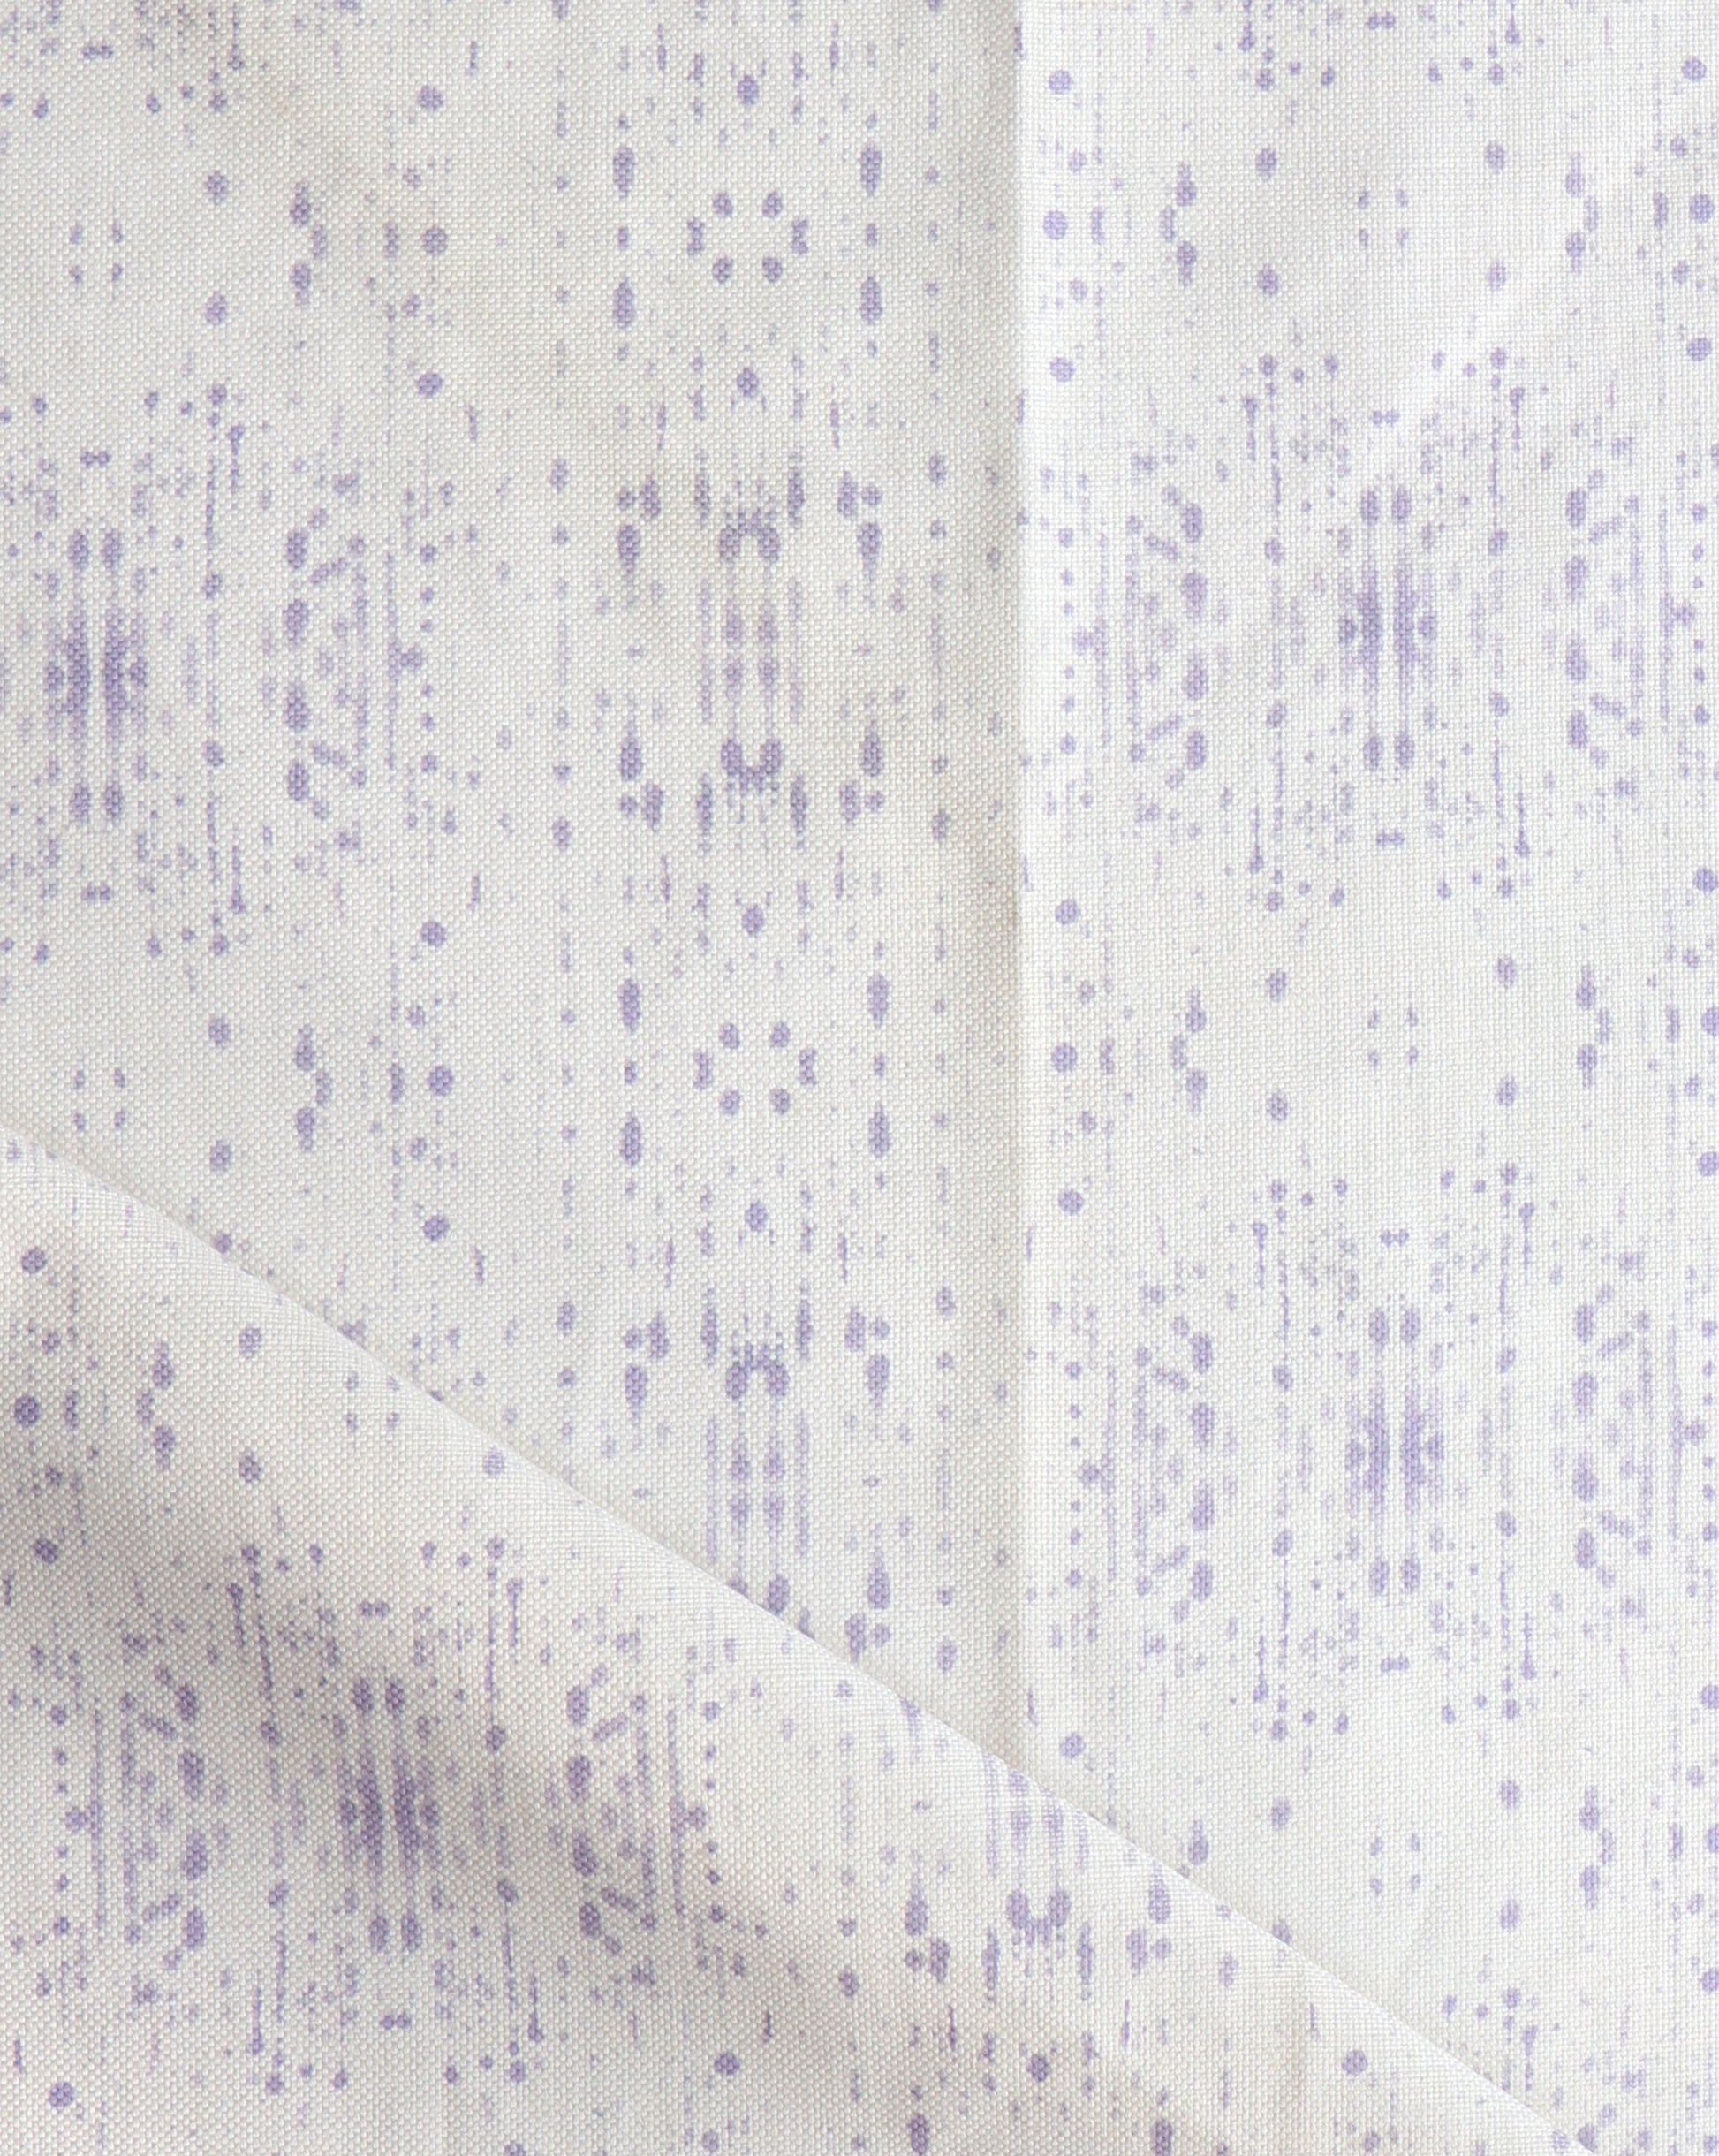 A white and purple Omaha Kinship Fabric Mulberry with dots on it, inspired by oceanic art